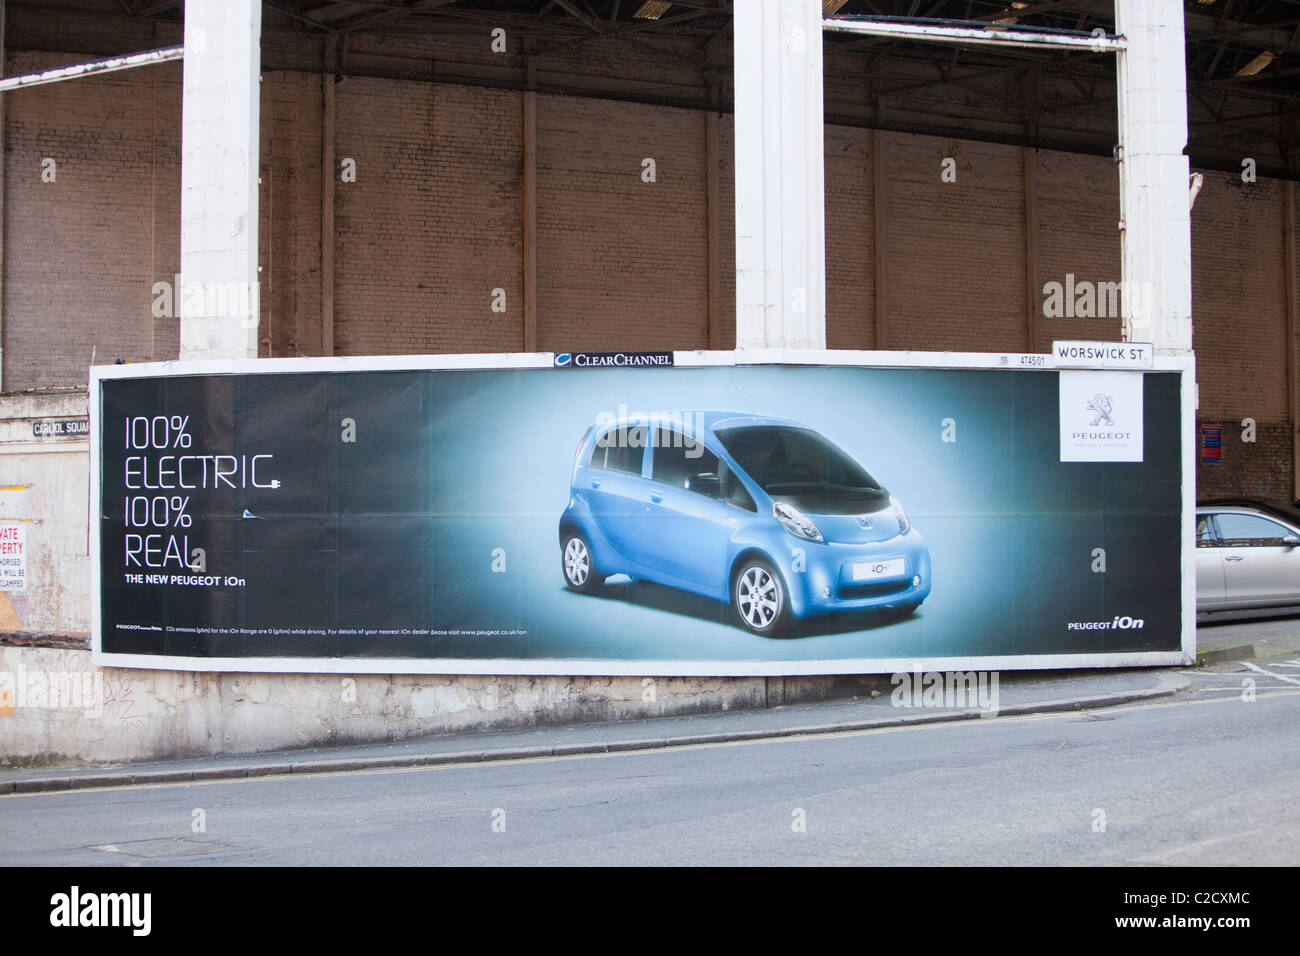 An advert for an electric car on a bill board in Newcastle, UK. Stock Photo